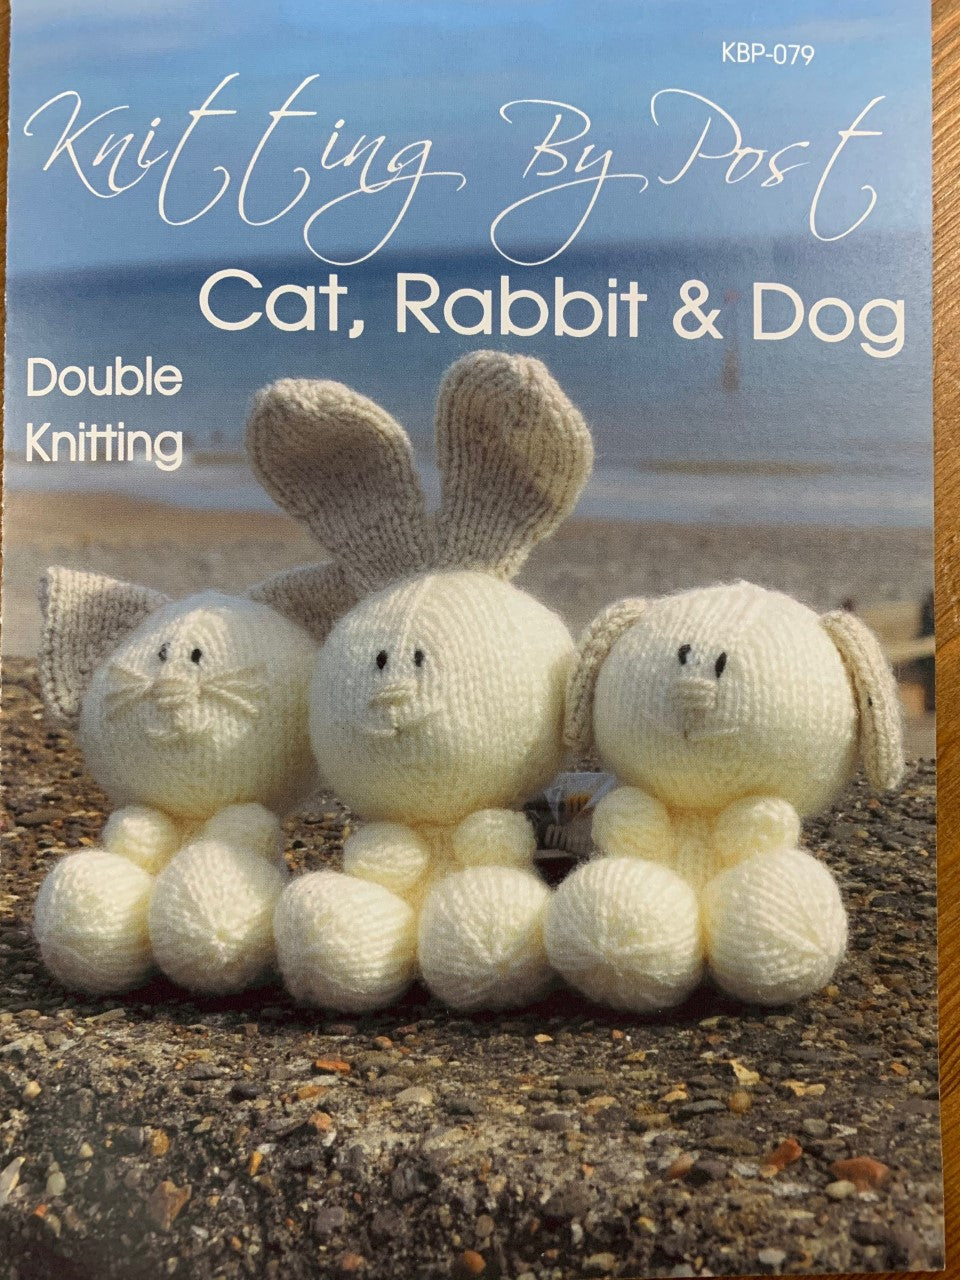 079 KBP079 Cat, Rabbit and Dog soft toy in dk knitting pattern